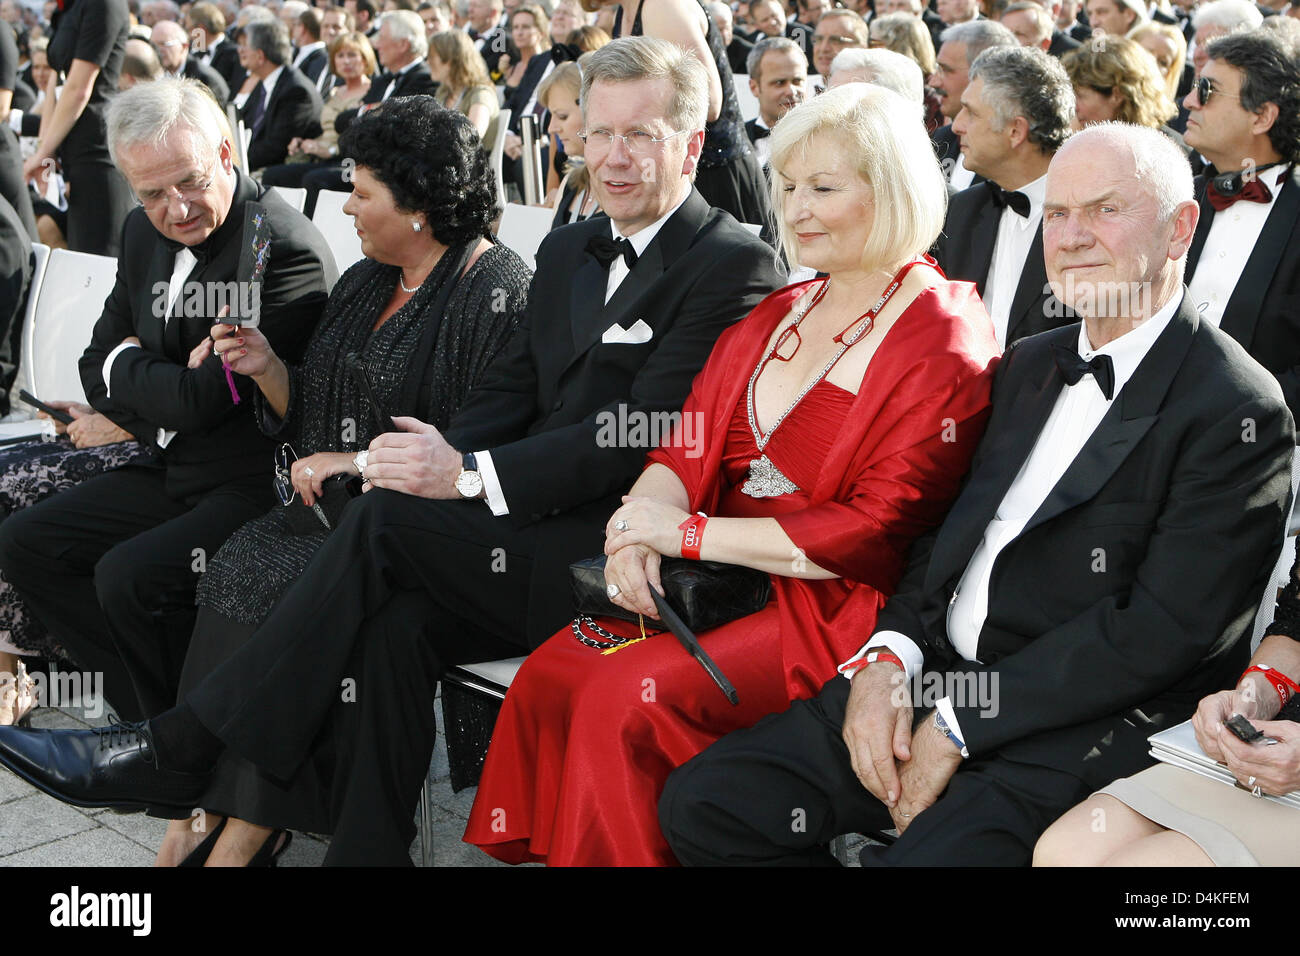 Martin Winterkorn (L-R), CEO of Volkswagen AG, his wife Anita, Christian Wulff, Prime Minister of Lower Saxony, Ursula Piech and her husband Ferdinand Piech, chairman of the board of Volkswagen, sit in the first row during the ceremonial act on the 100th anniversary of car producer Audi in Ingolstadt, Germany, 16 July 2009. Celebrities from politics, economy, culture and sports are Stock Photo